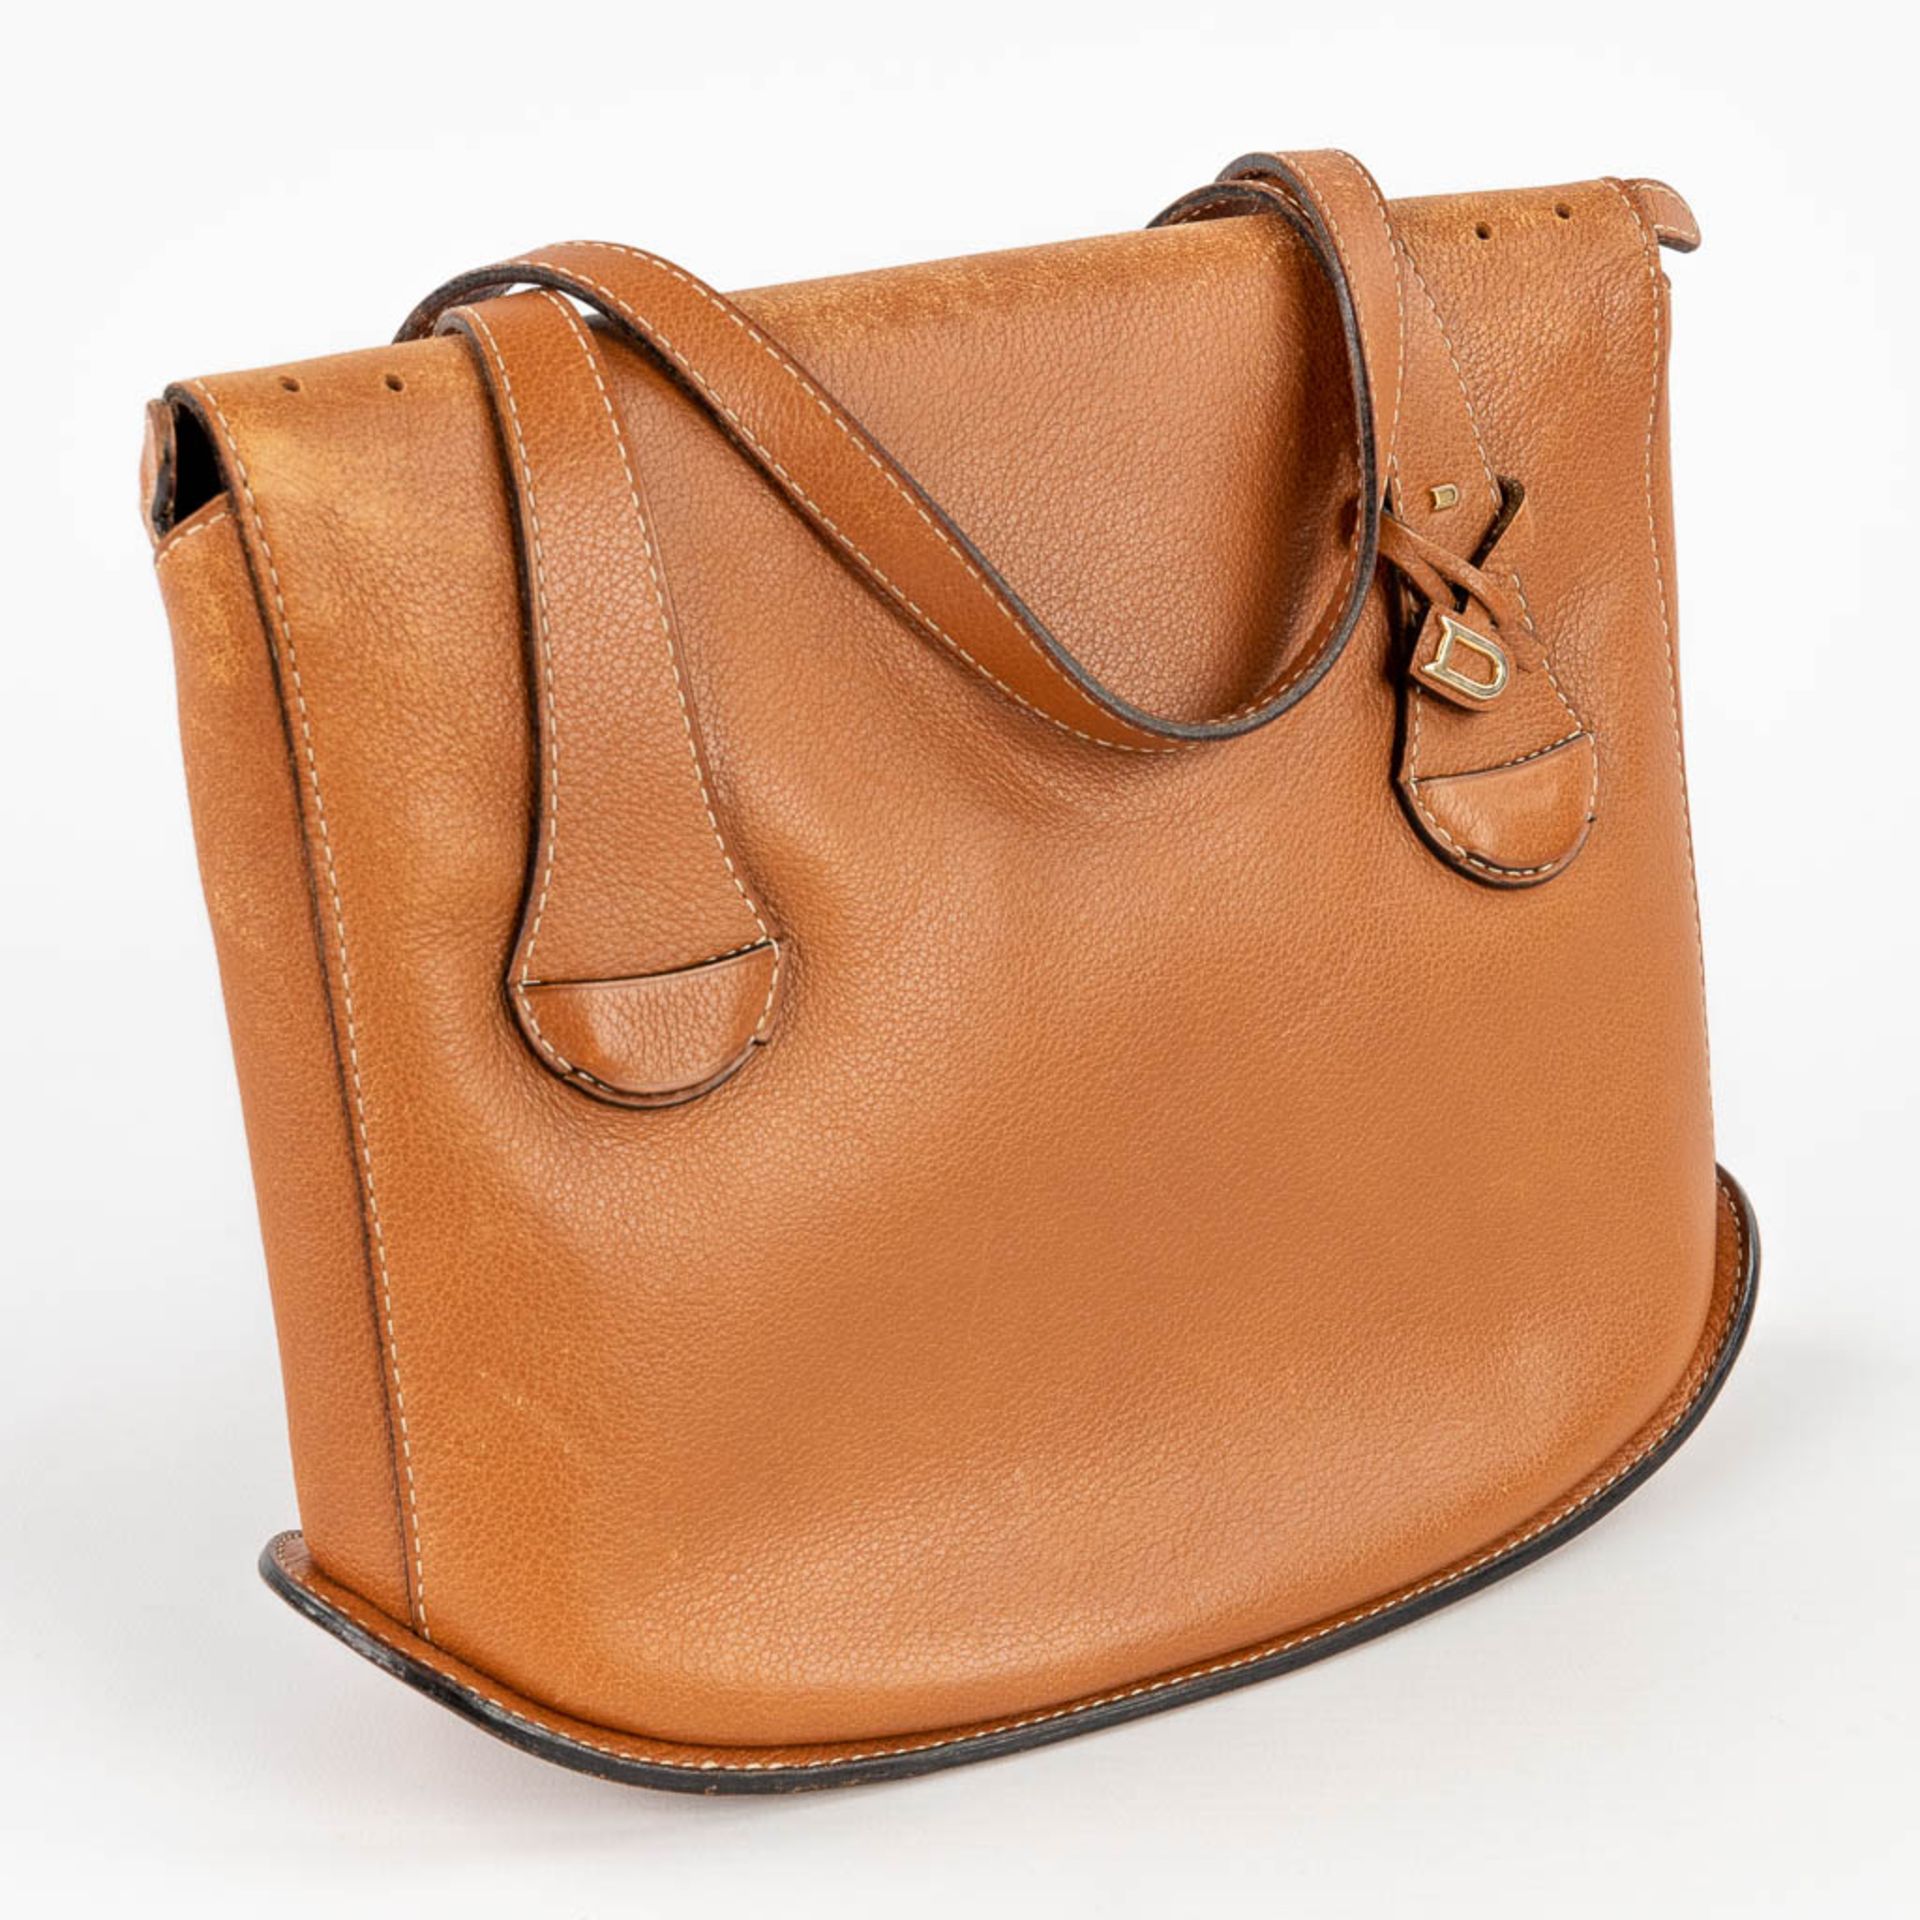 Delvaux Memoire PM, with the original purse, made of cognac-coloured leather. (L: 10 x W: 26 x H: 20 - Image 5 of 27